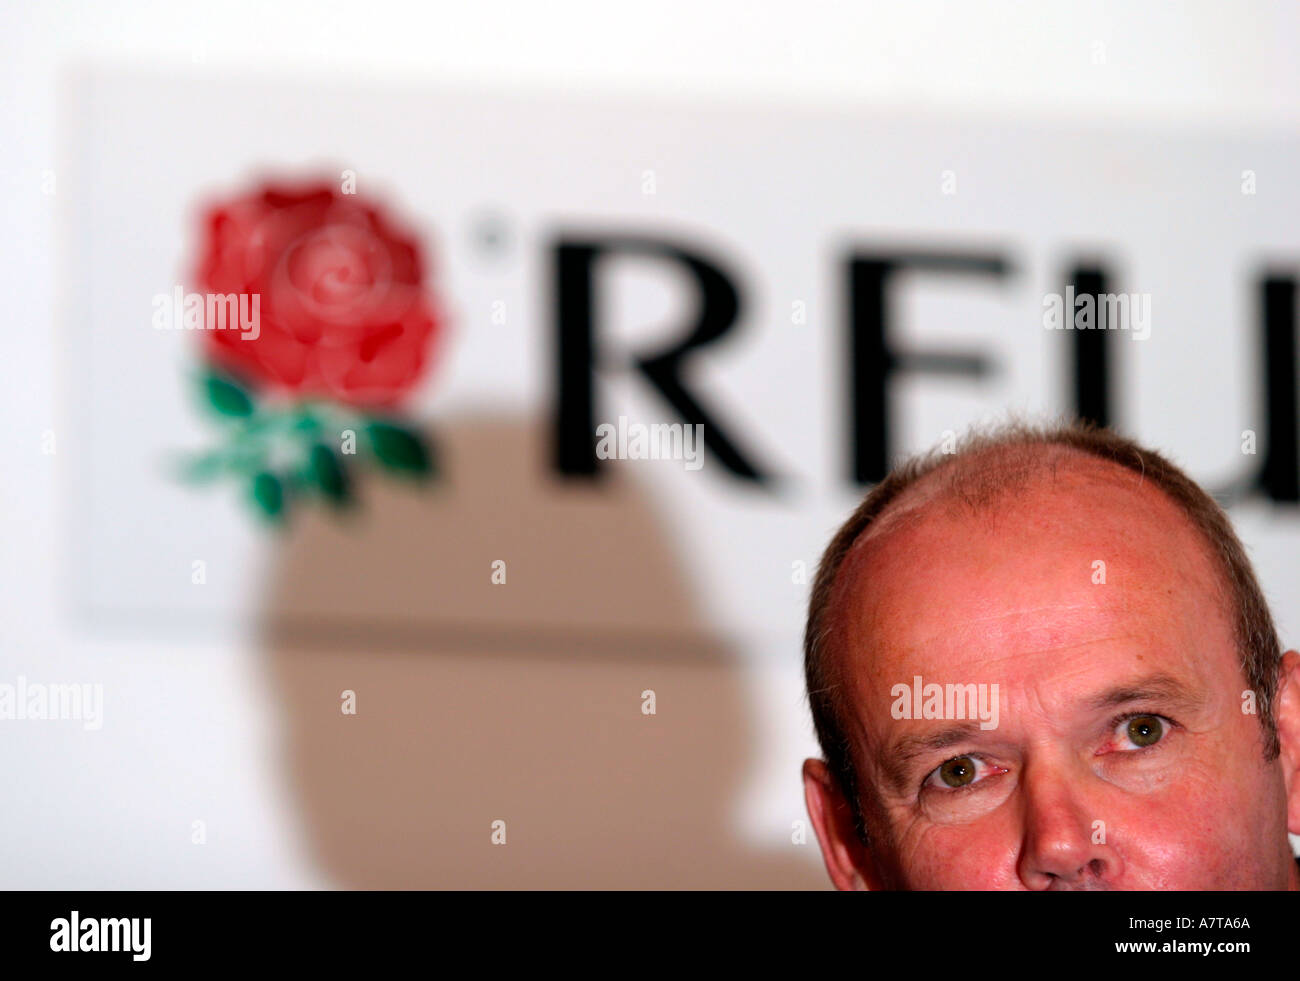 Clive Woodward England Rugby coach at his resignation press conference September 2004 Twickenham Stock Photo